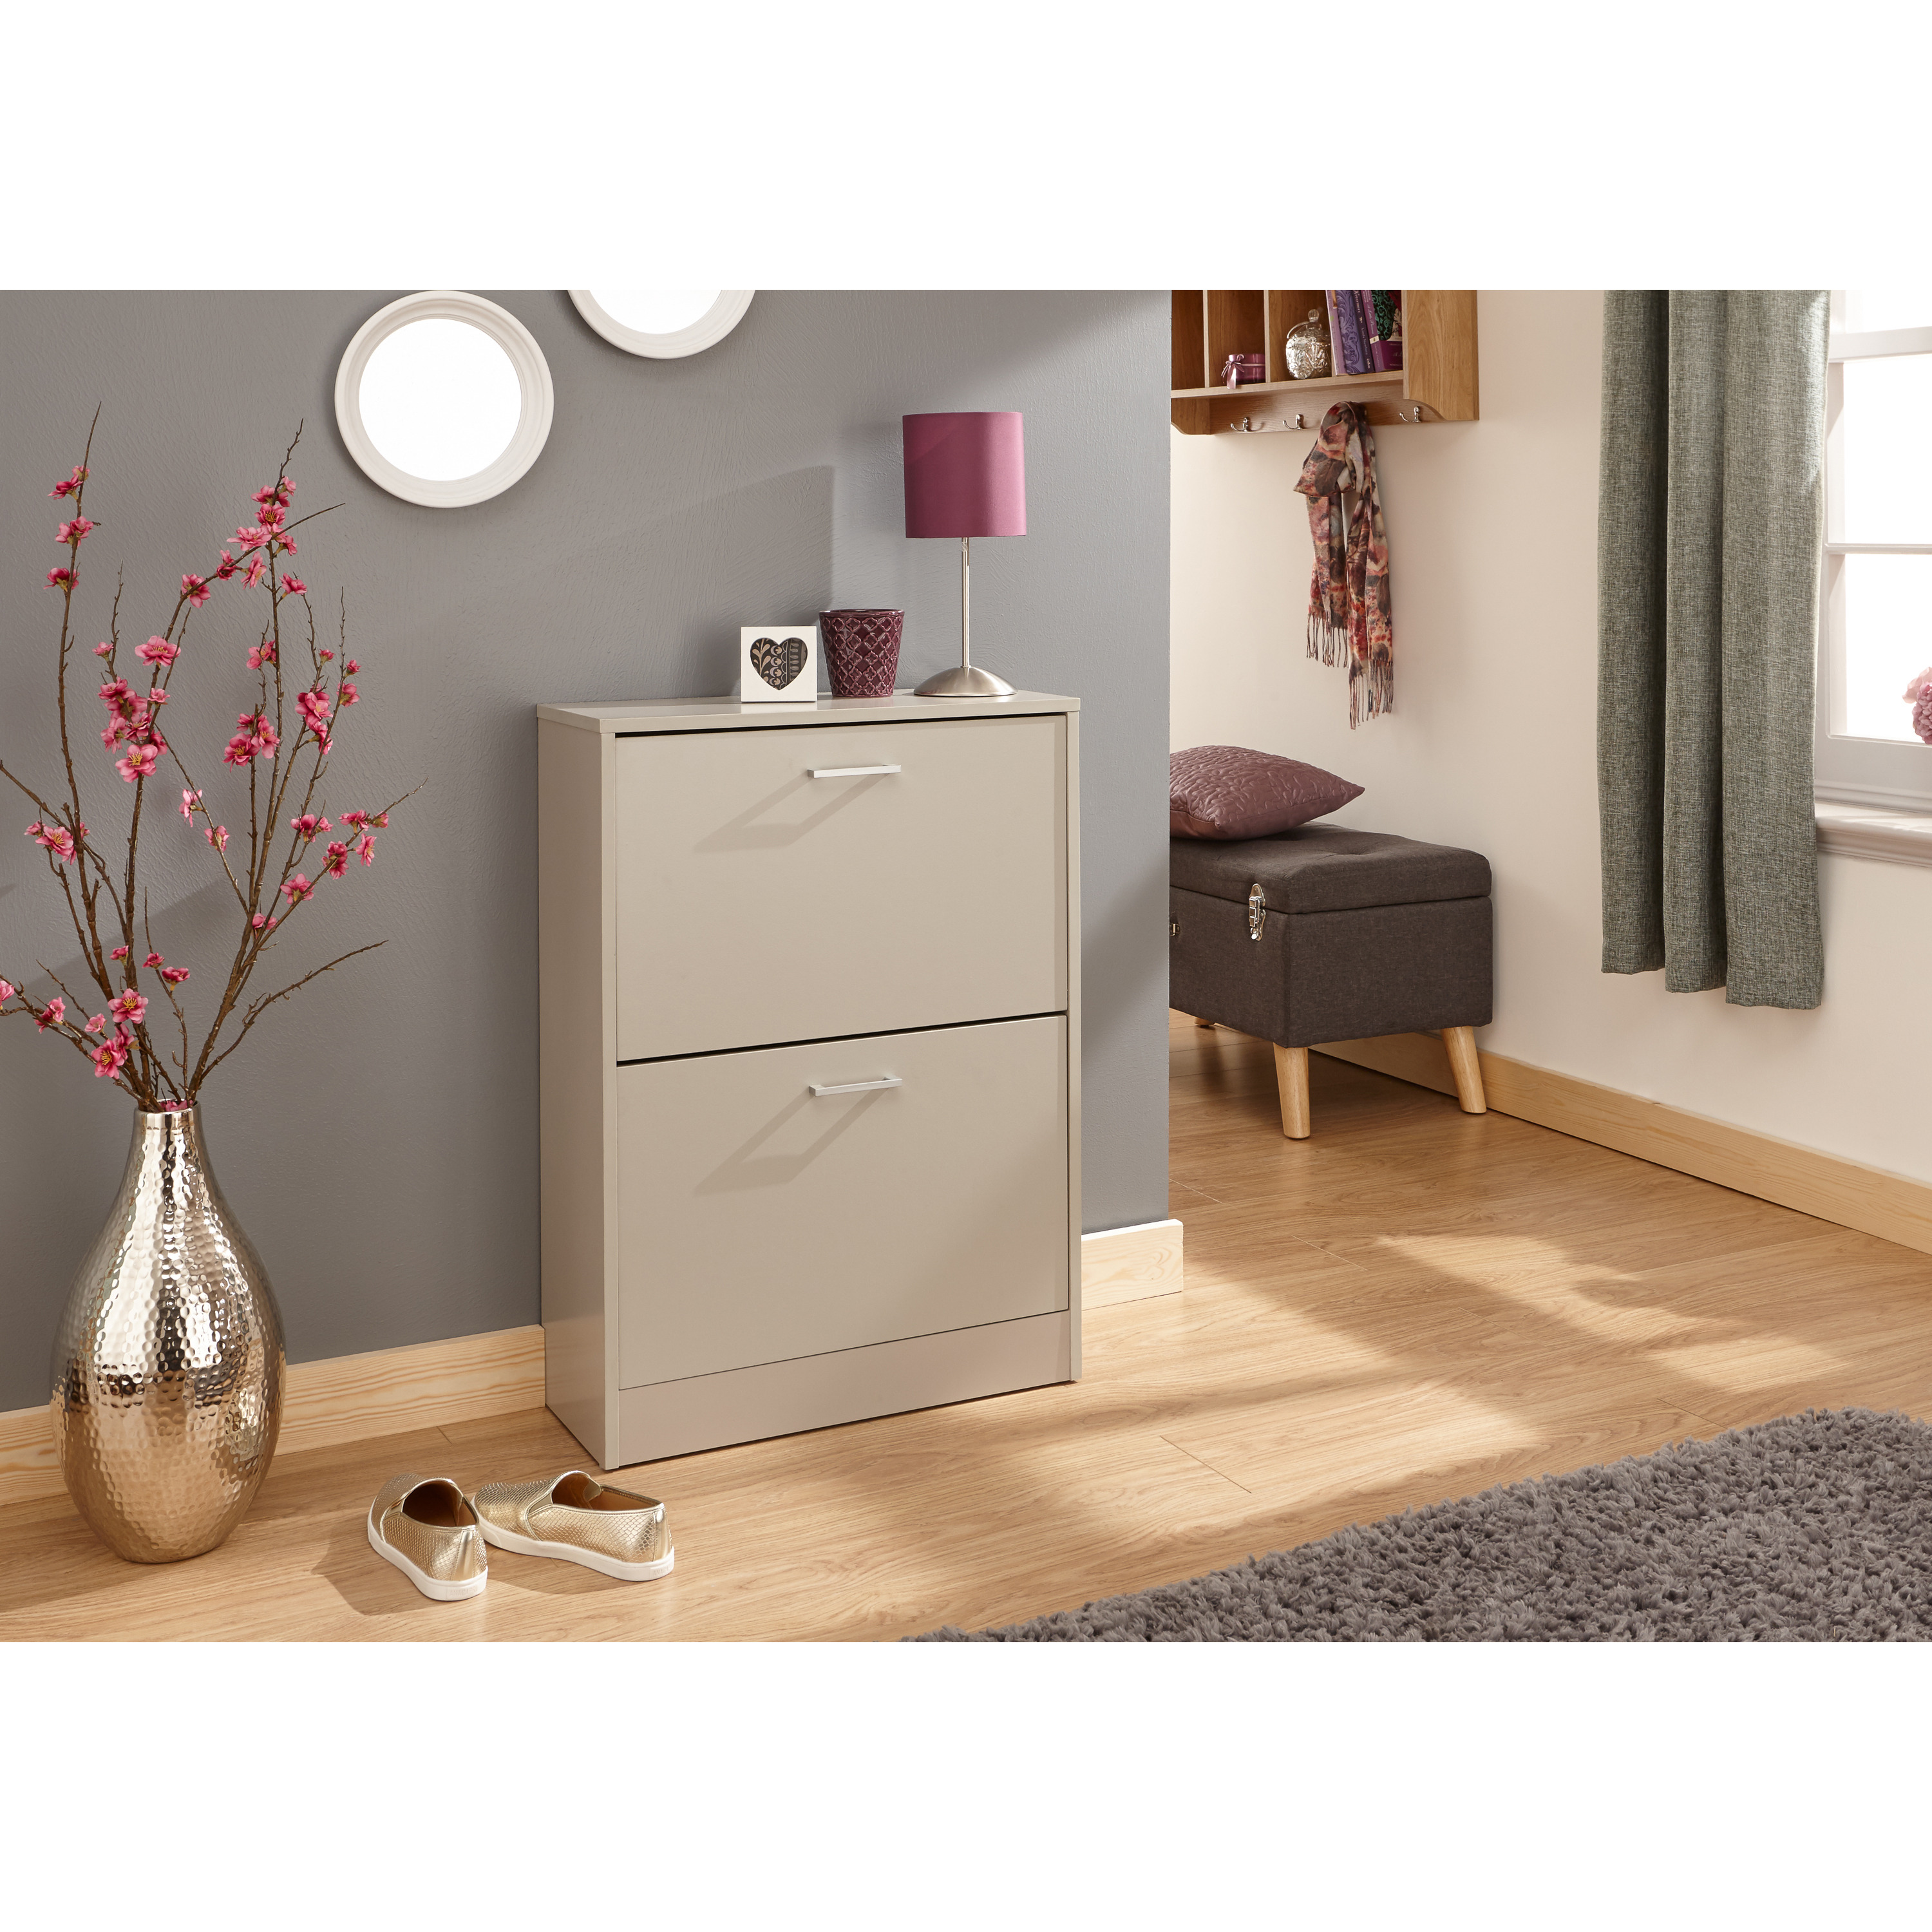 GFW Stirling Two Tier Shoe Cabinet Grey - image 1